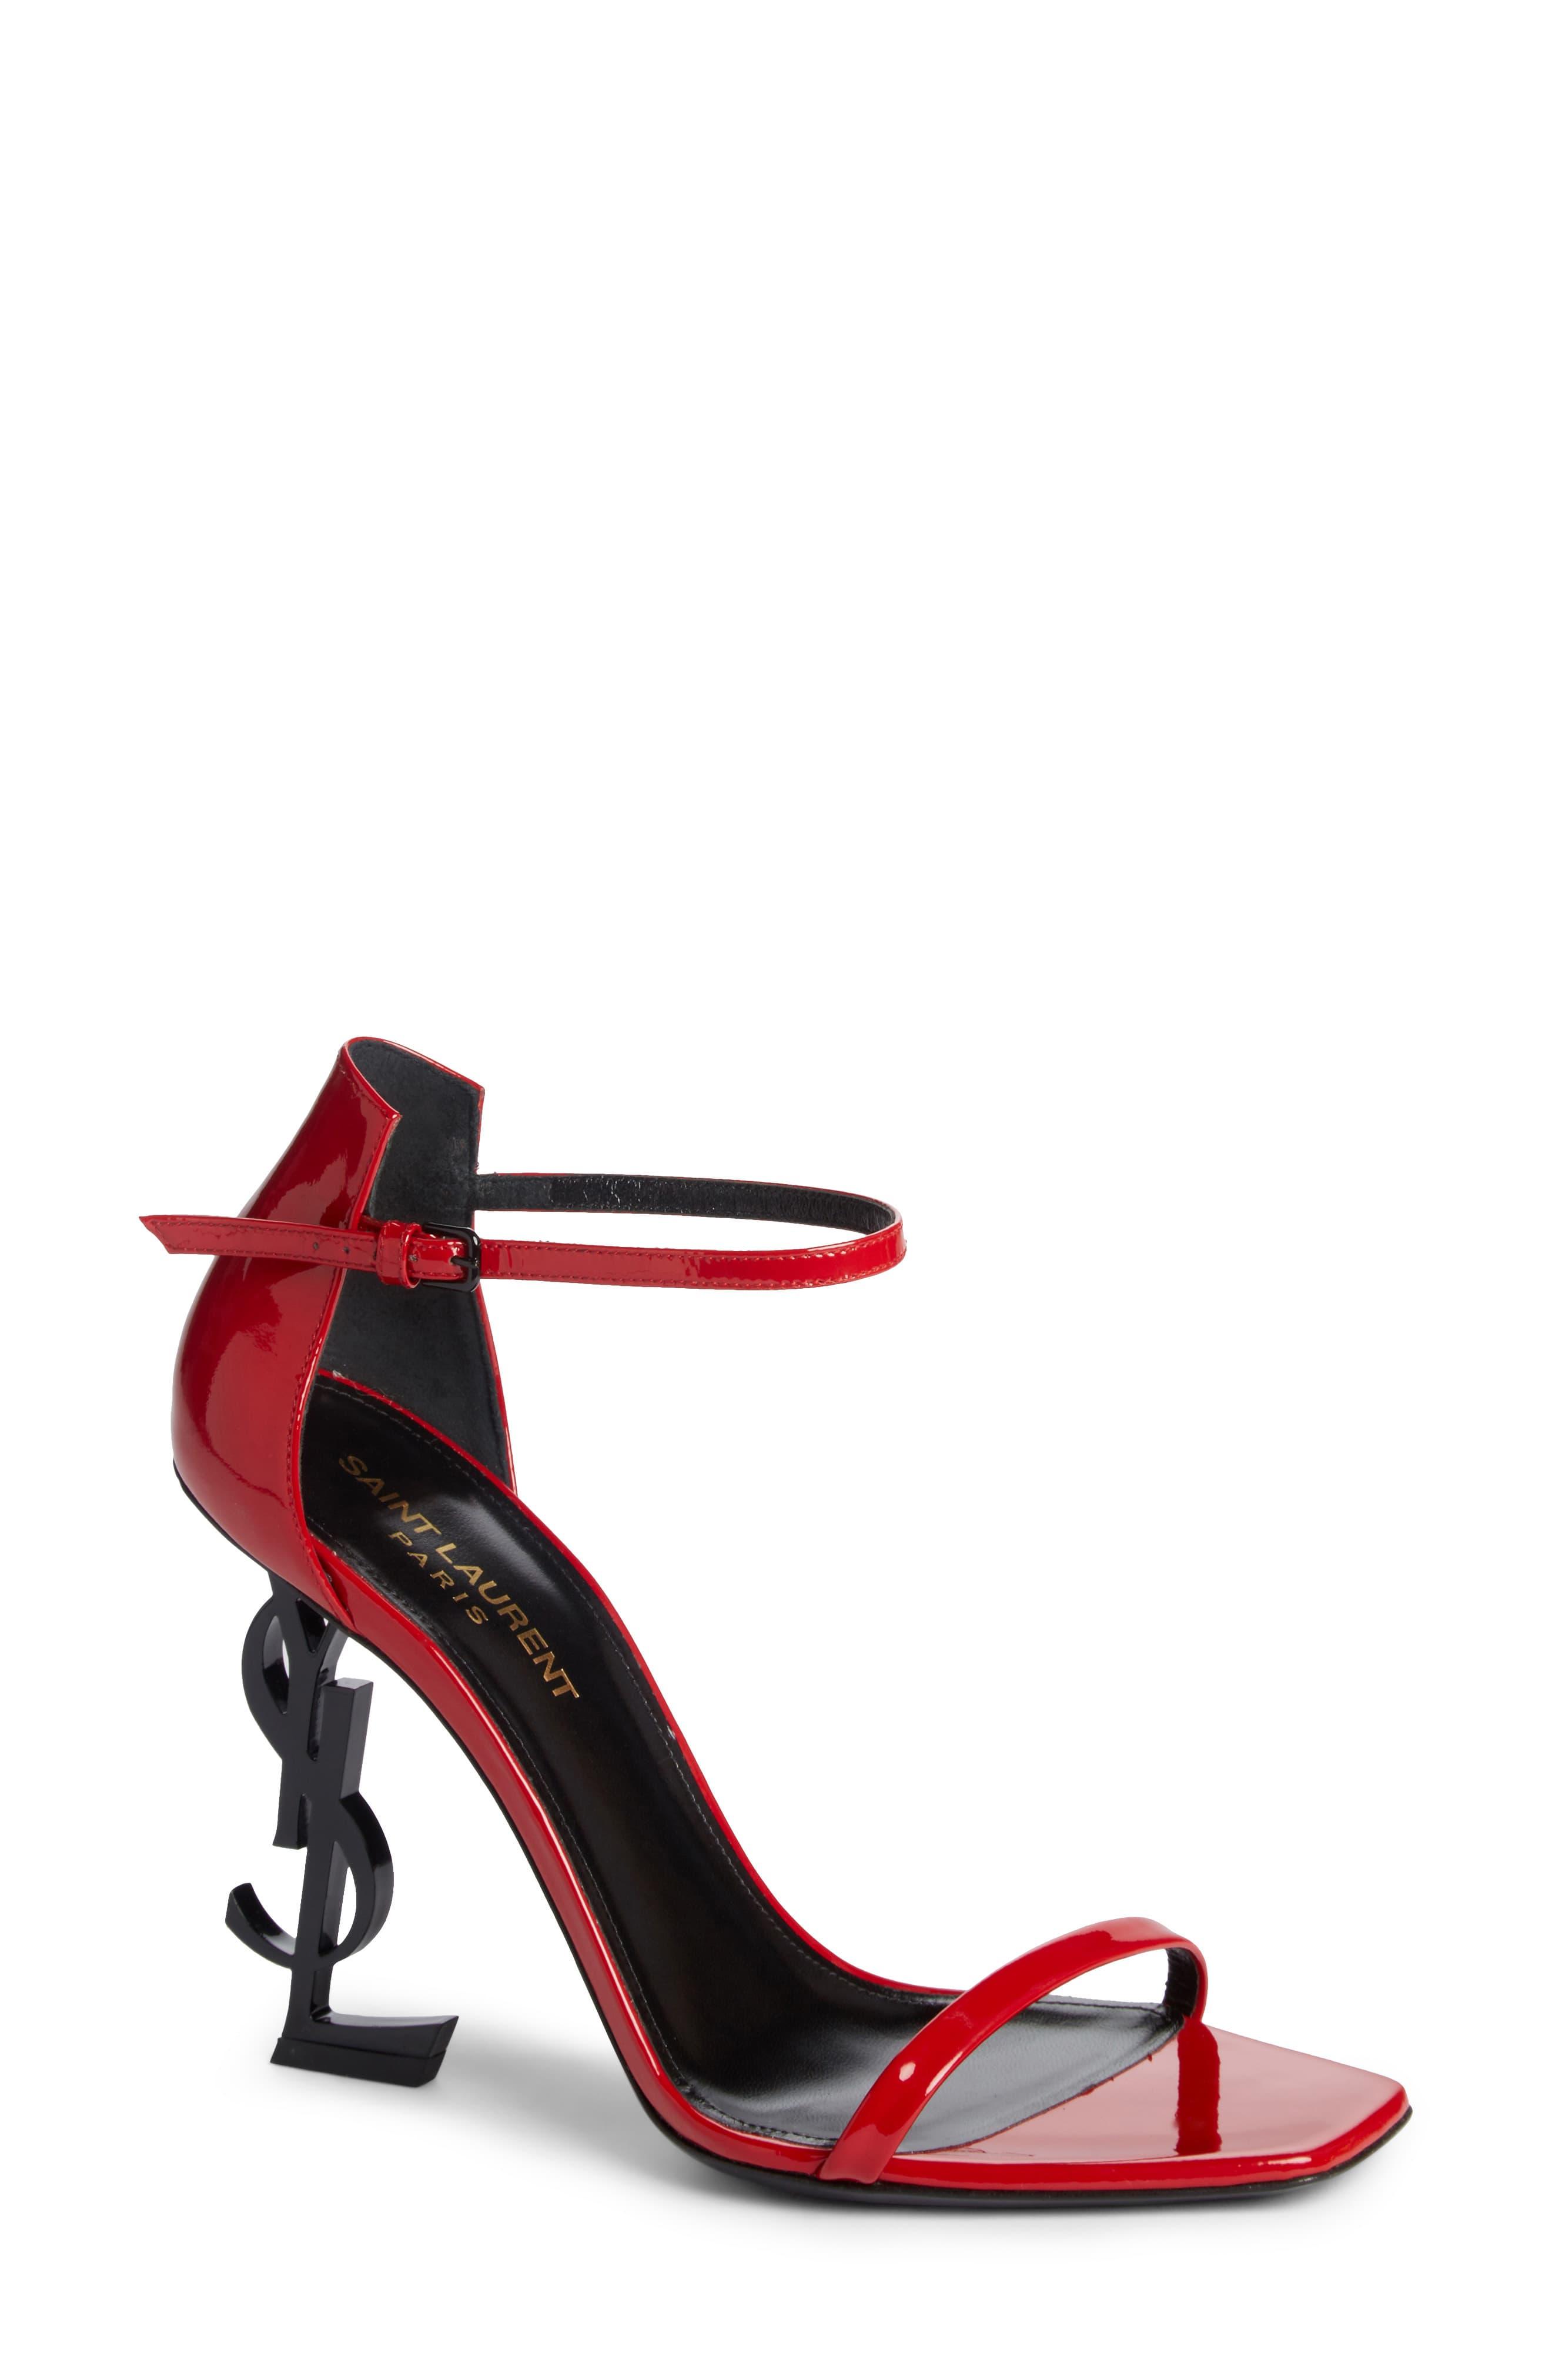 Opyum Ysl Ankle Strap Sandal in Red 